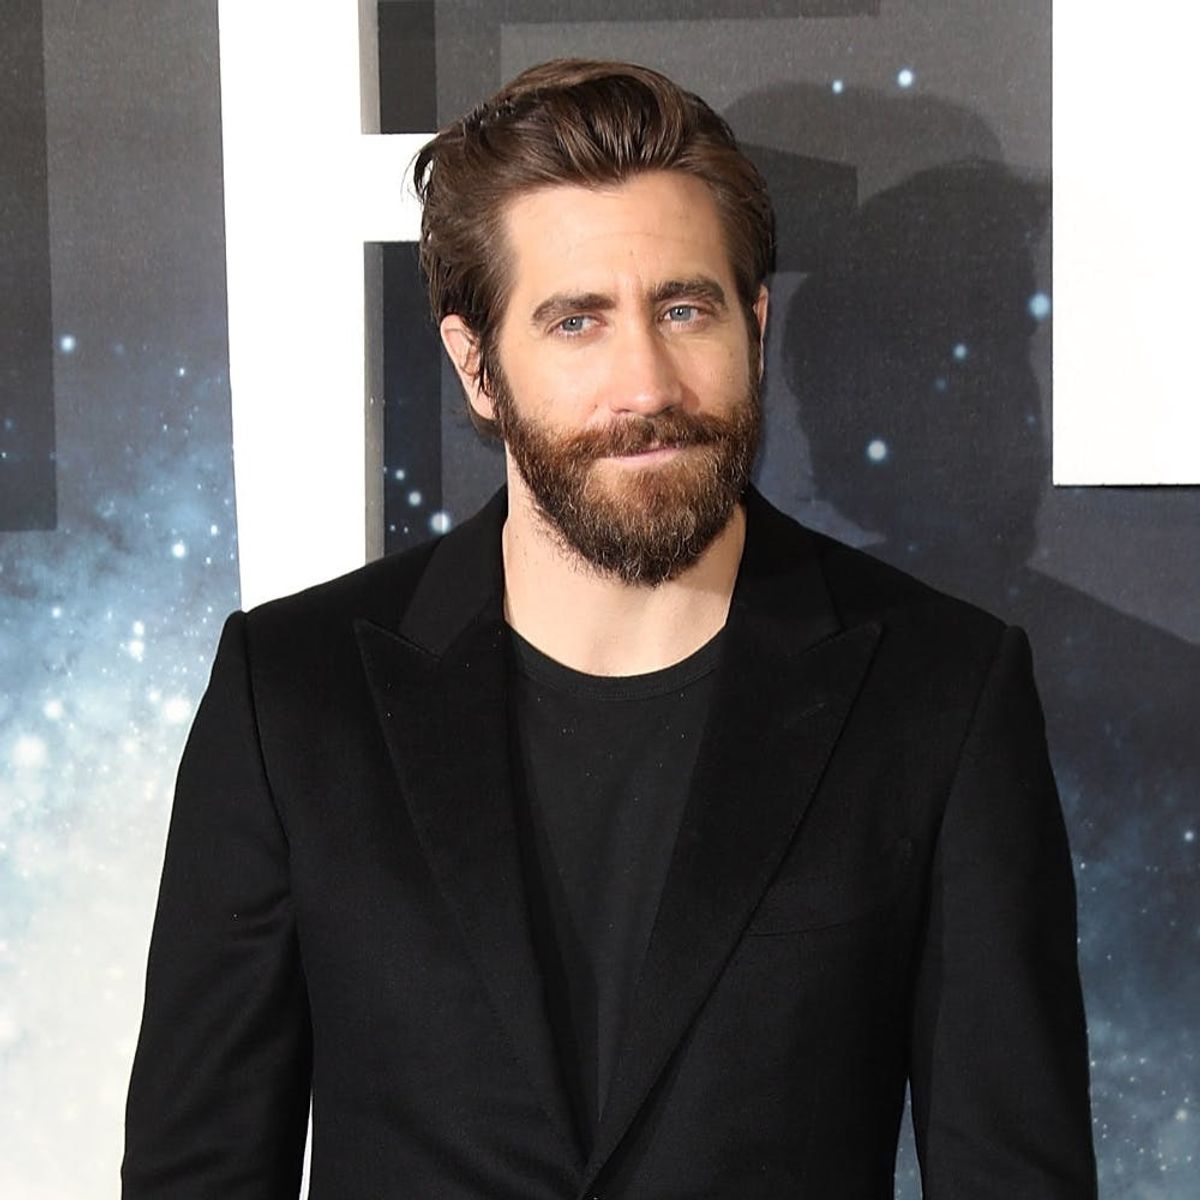 Notoriously Private Jake Gyllenhaal Has Finally Answered a Question About His Relationship With Taylor Swift